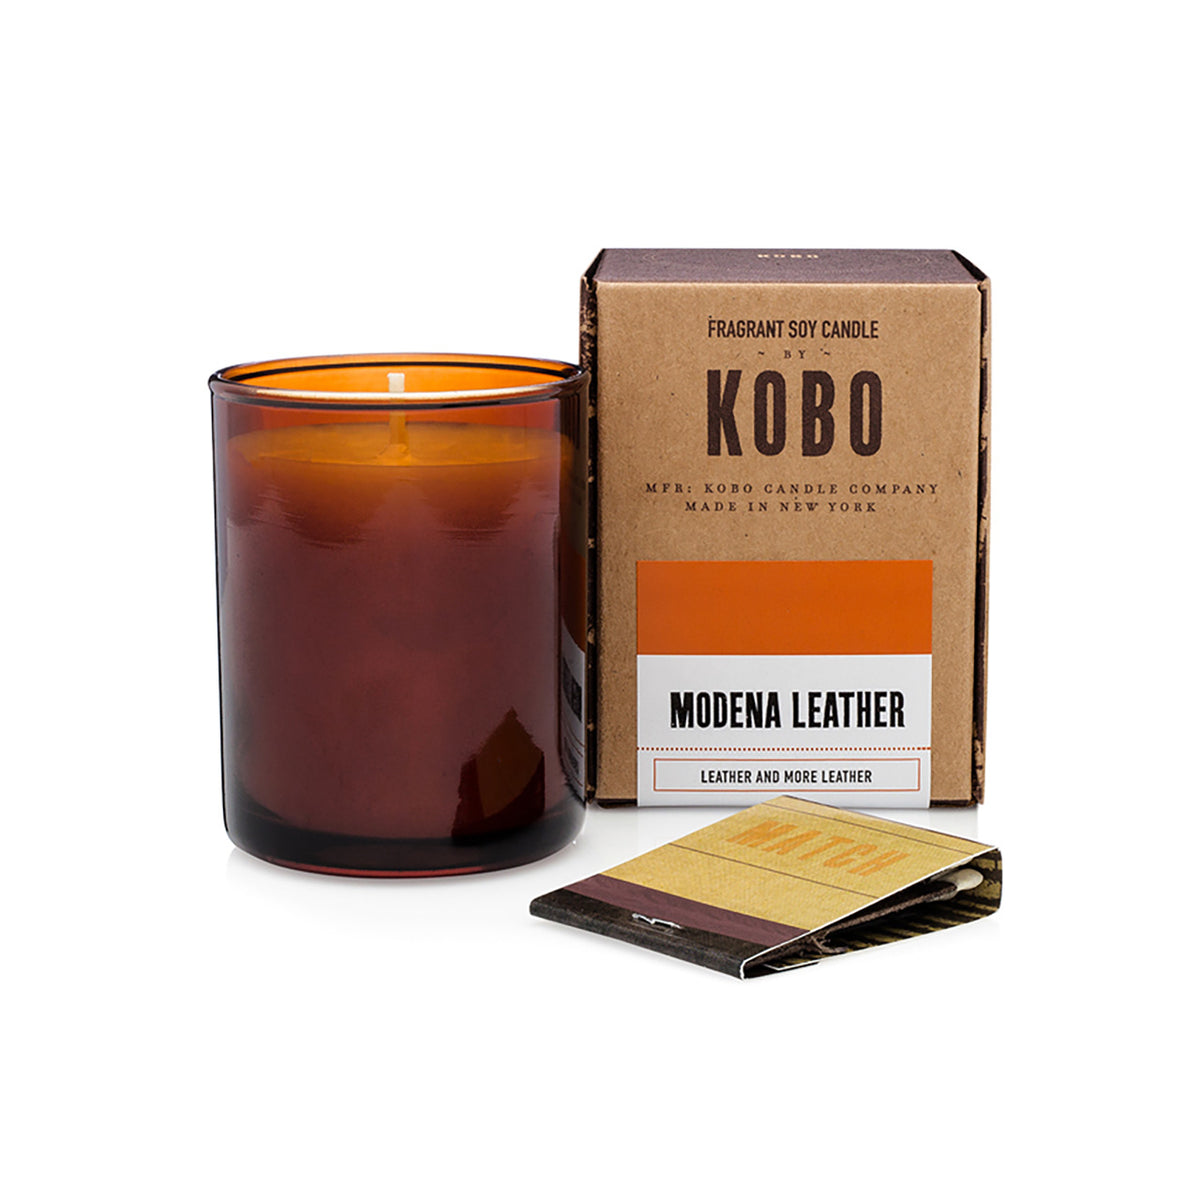 Kobo Pure Soy votive candle in an amber glass jar with ceramic matches and kraft box. Modena Leather scent